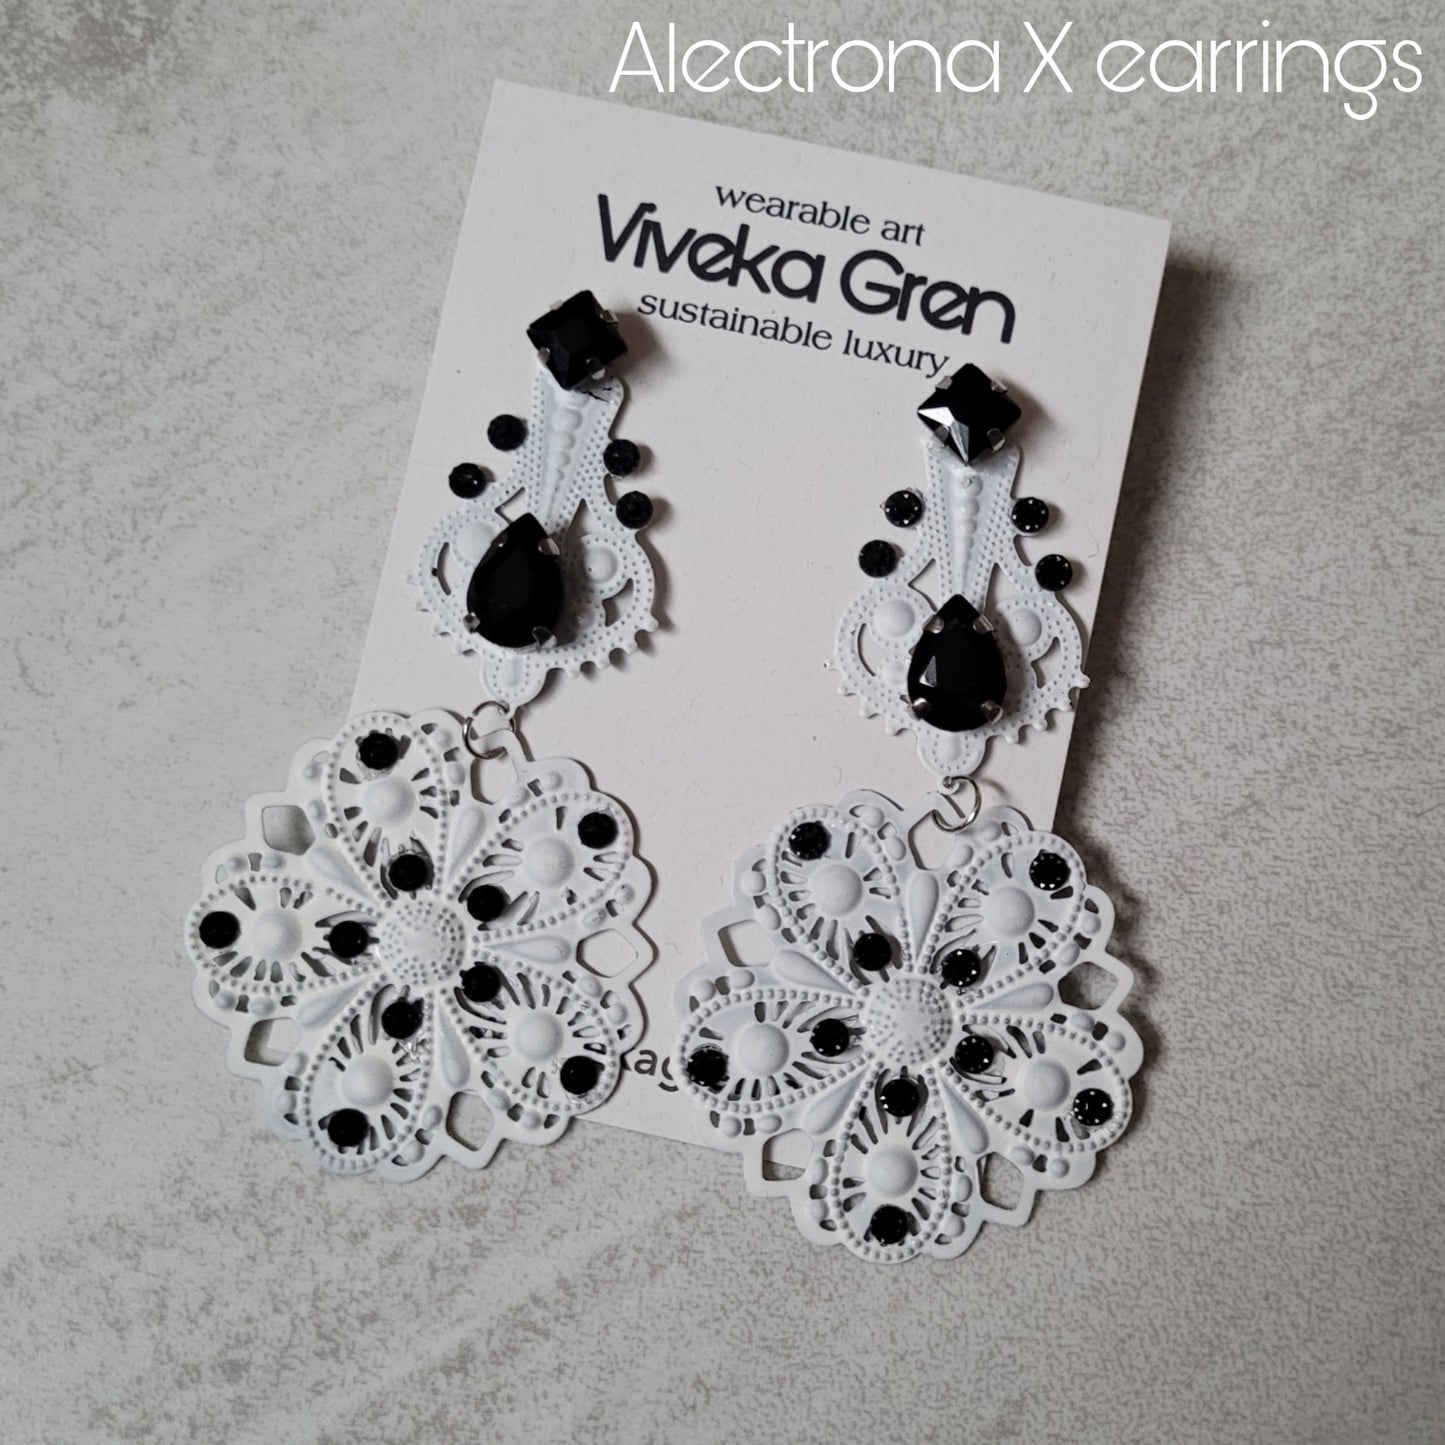 Deusa ex Machina collection: The Alectrona earrings (stud versions)